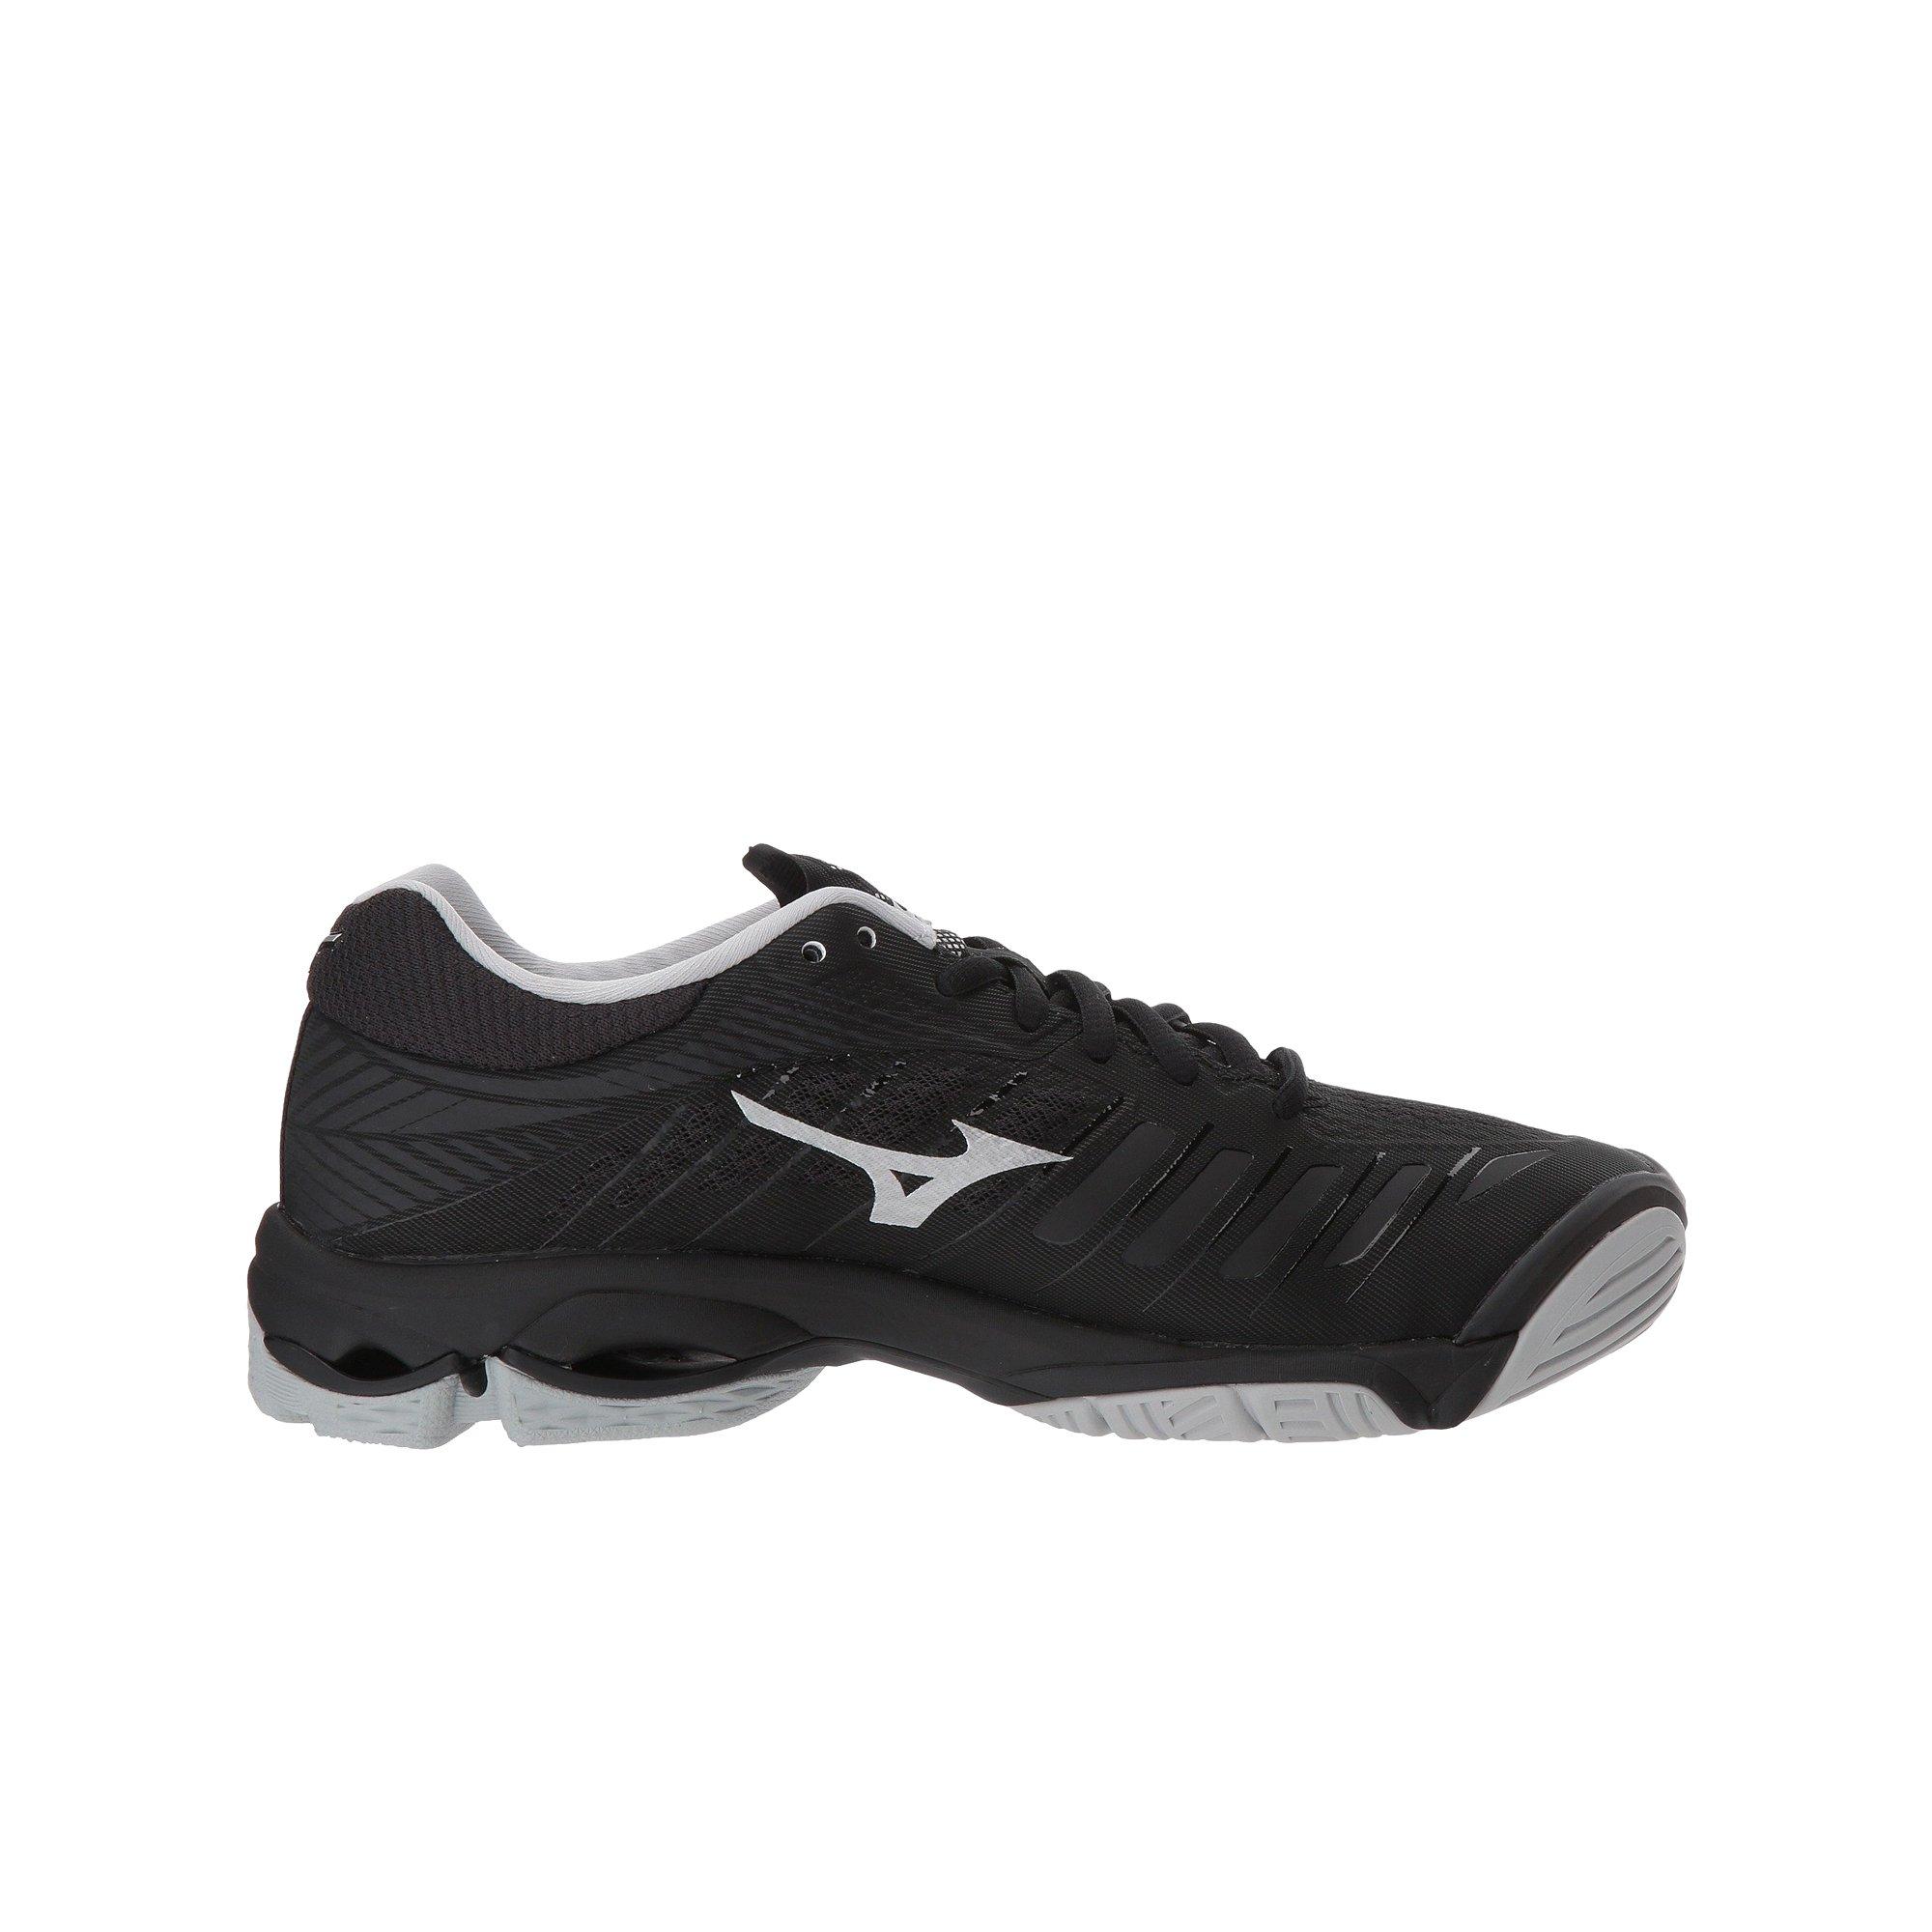 womens mizuno volleyball shoes clearance